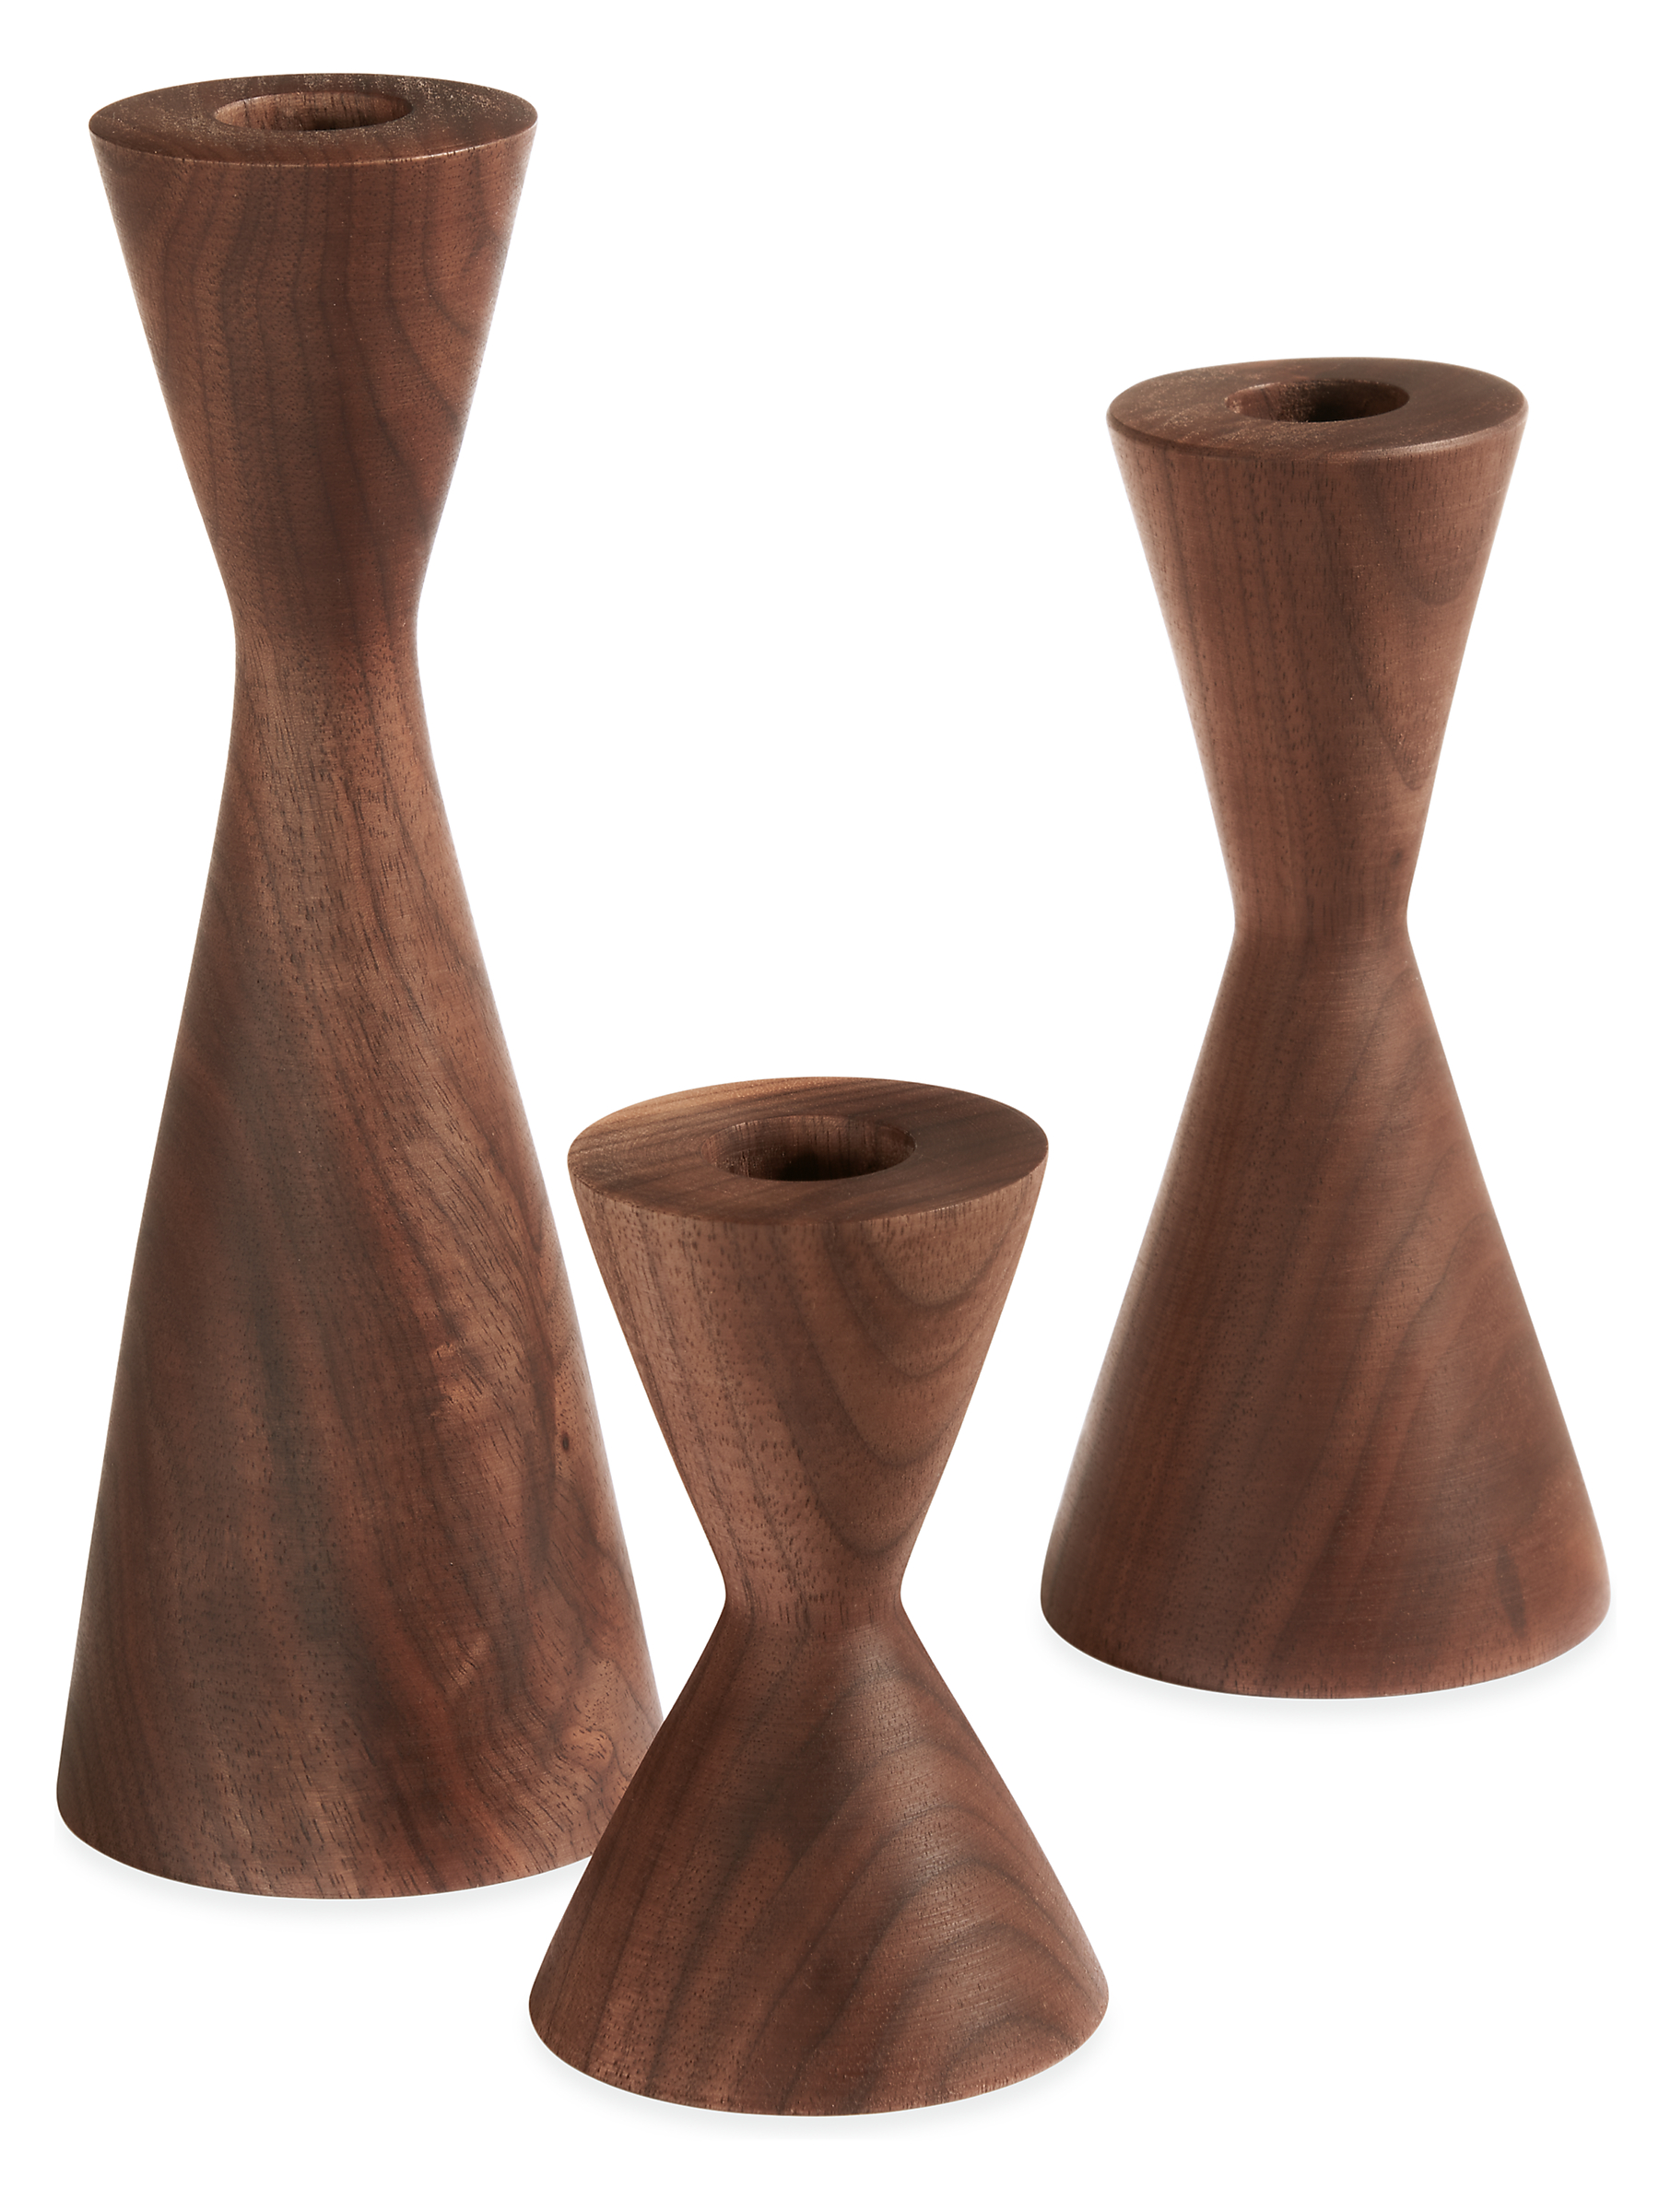 Holton Candle Holder Set of Three